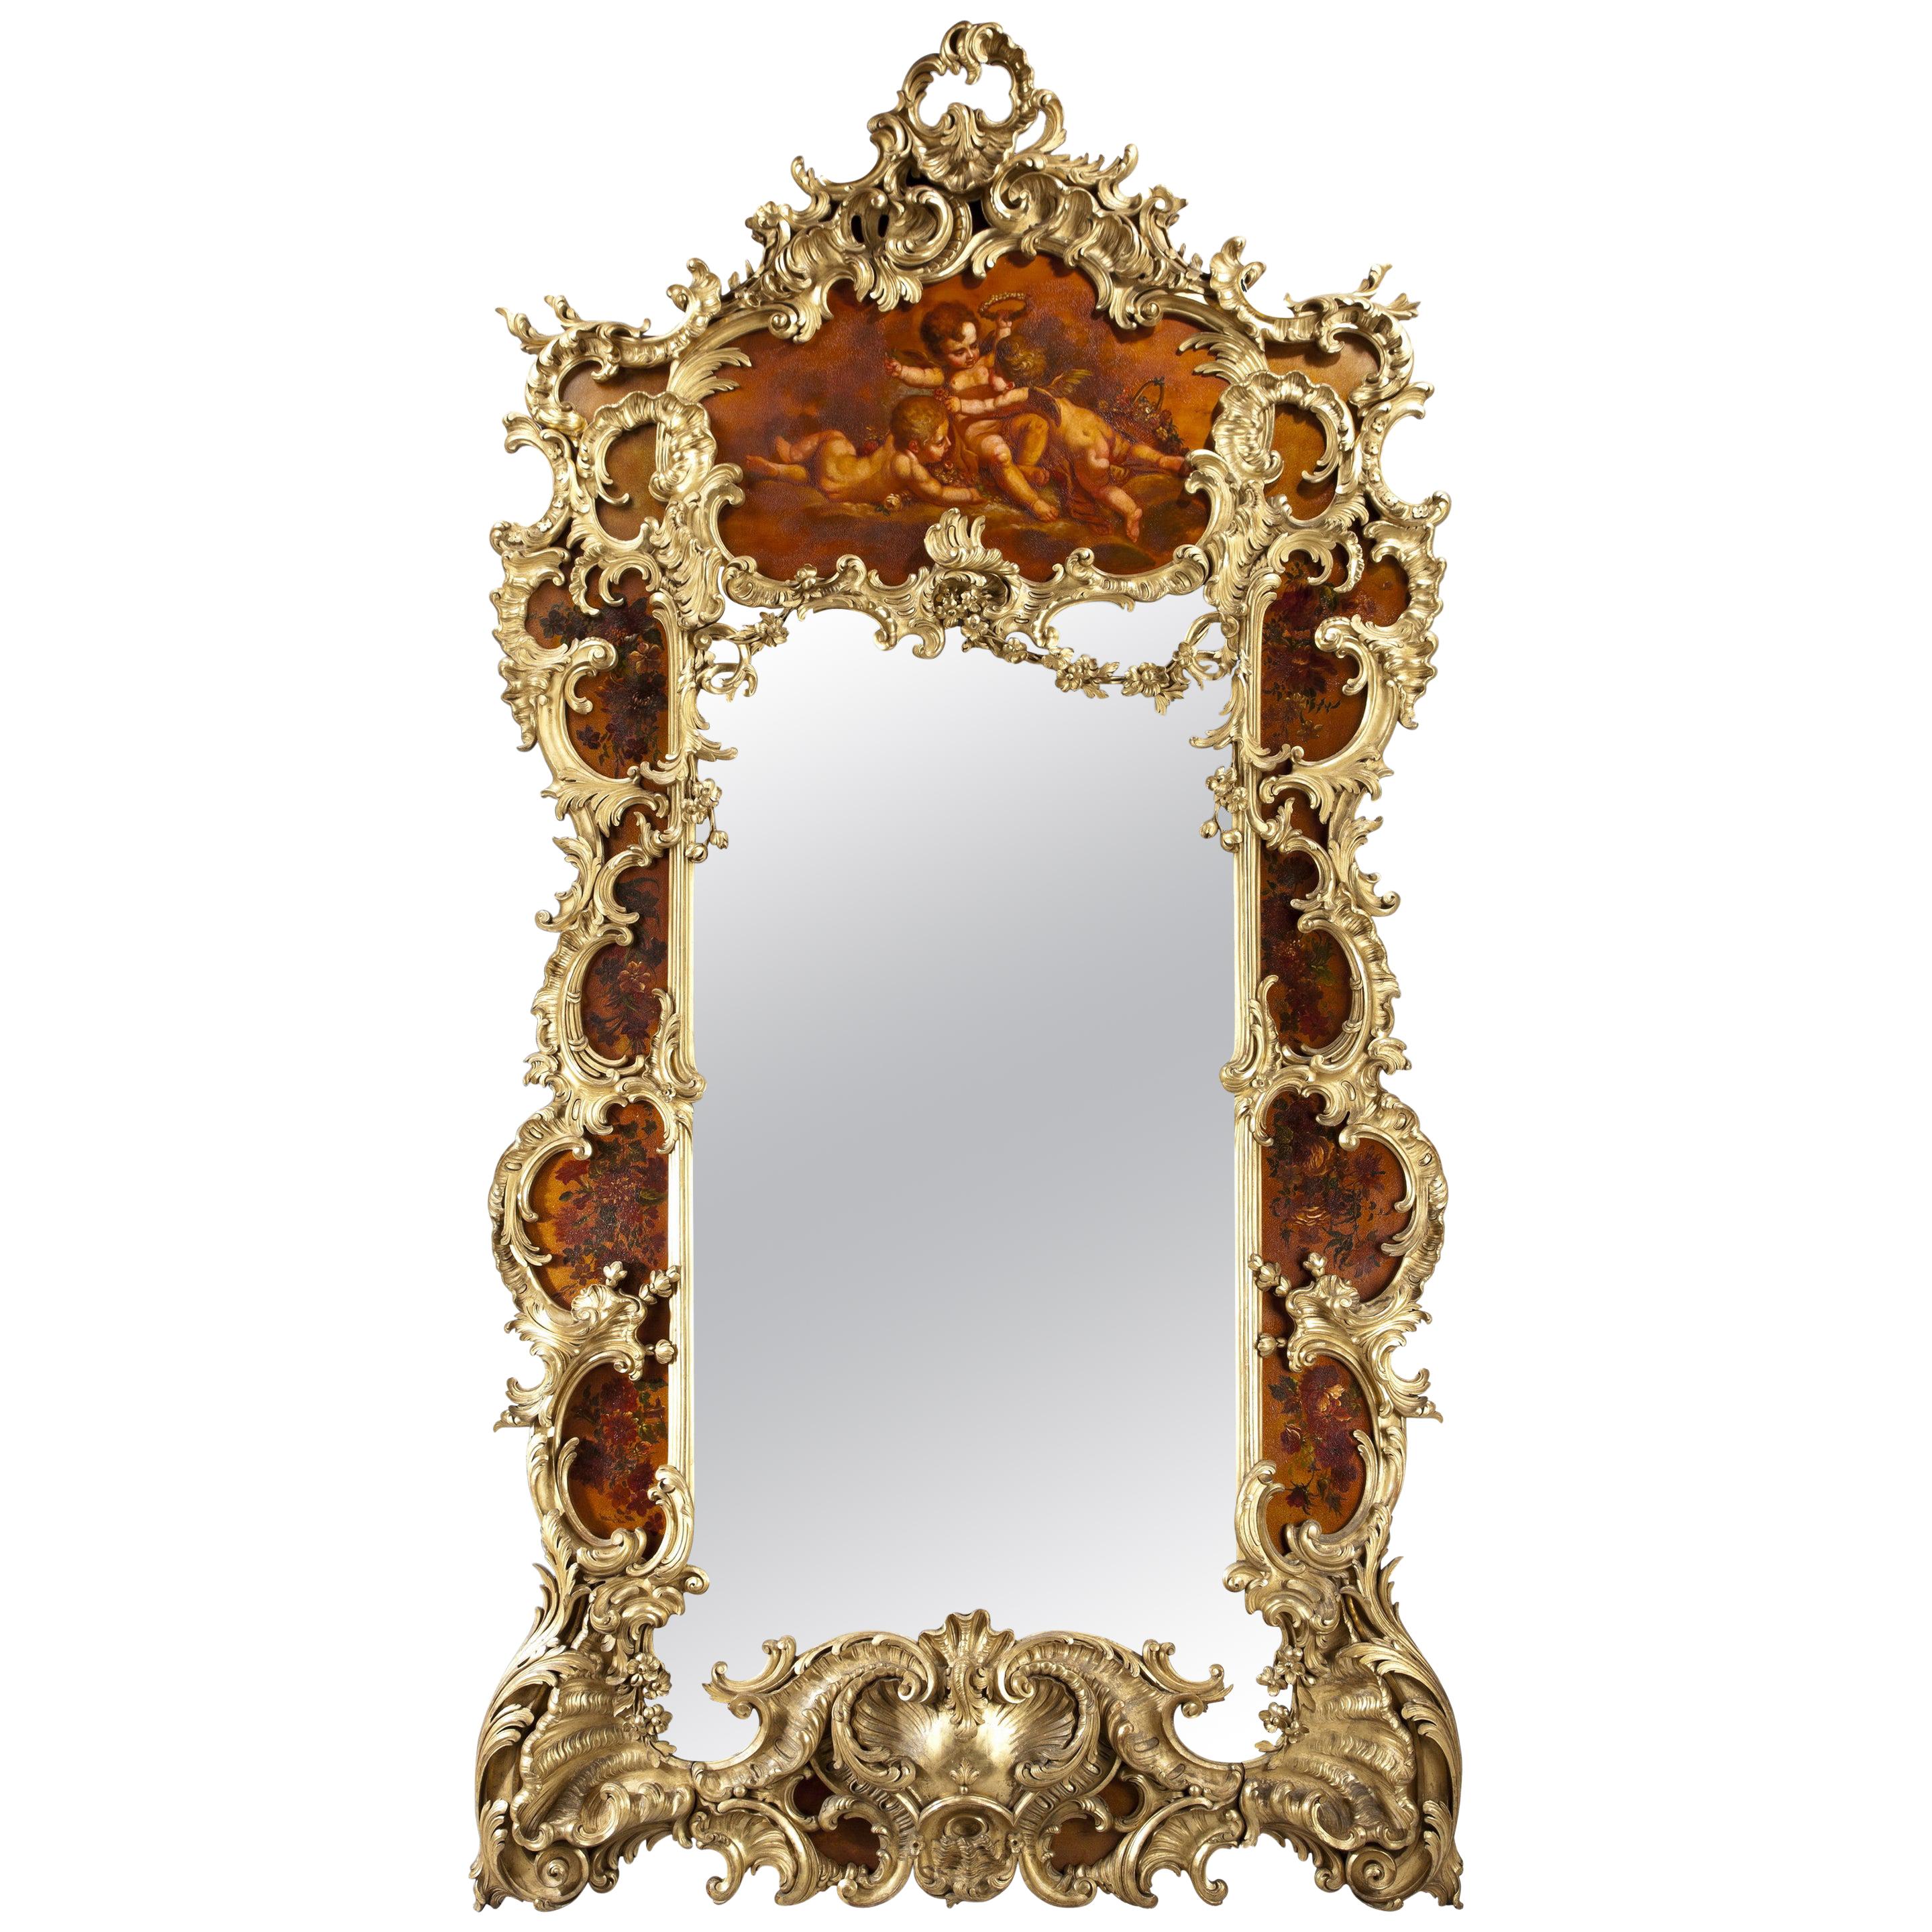 Large Giltwood and Vernis Martin Mirror by Louis Majorelle from the Dutch Royal